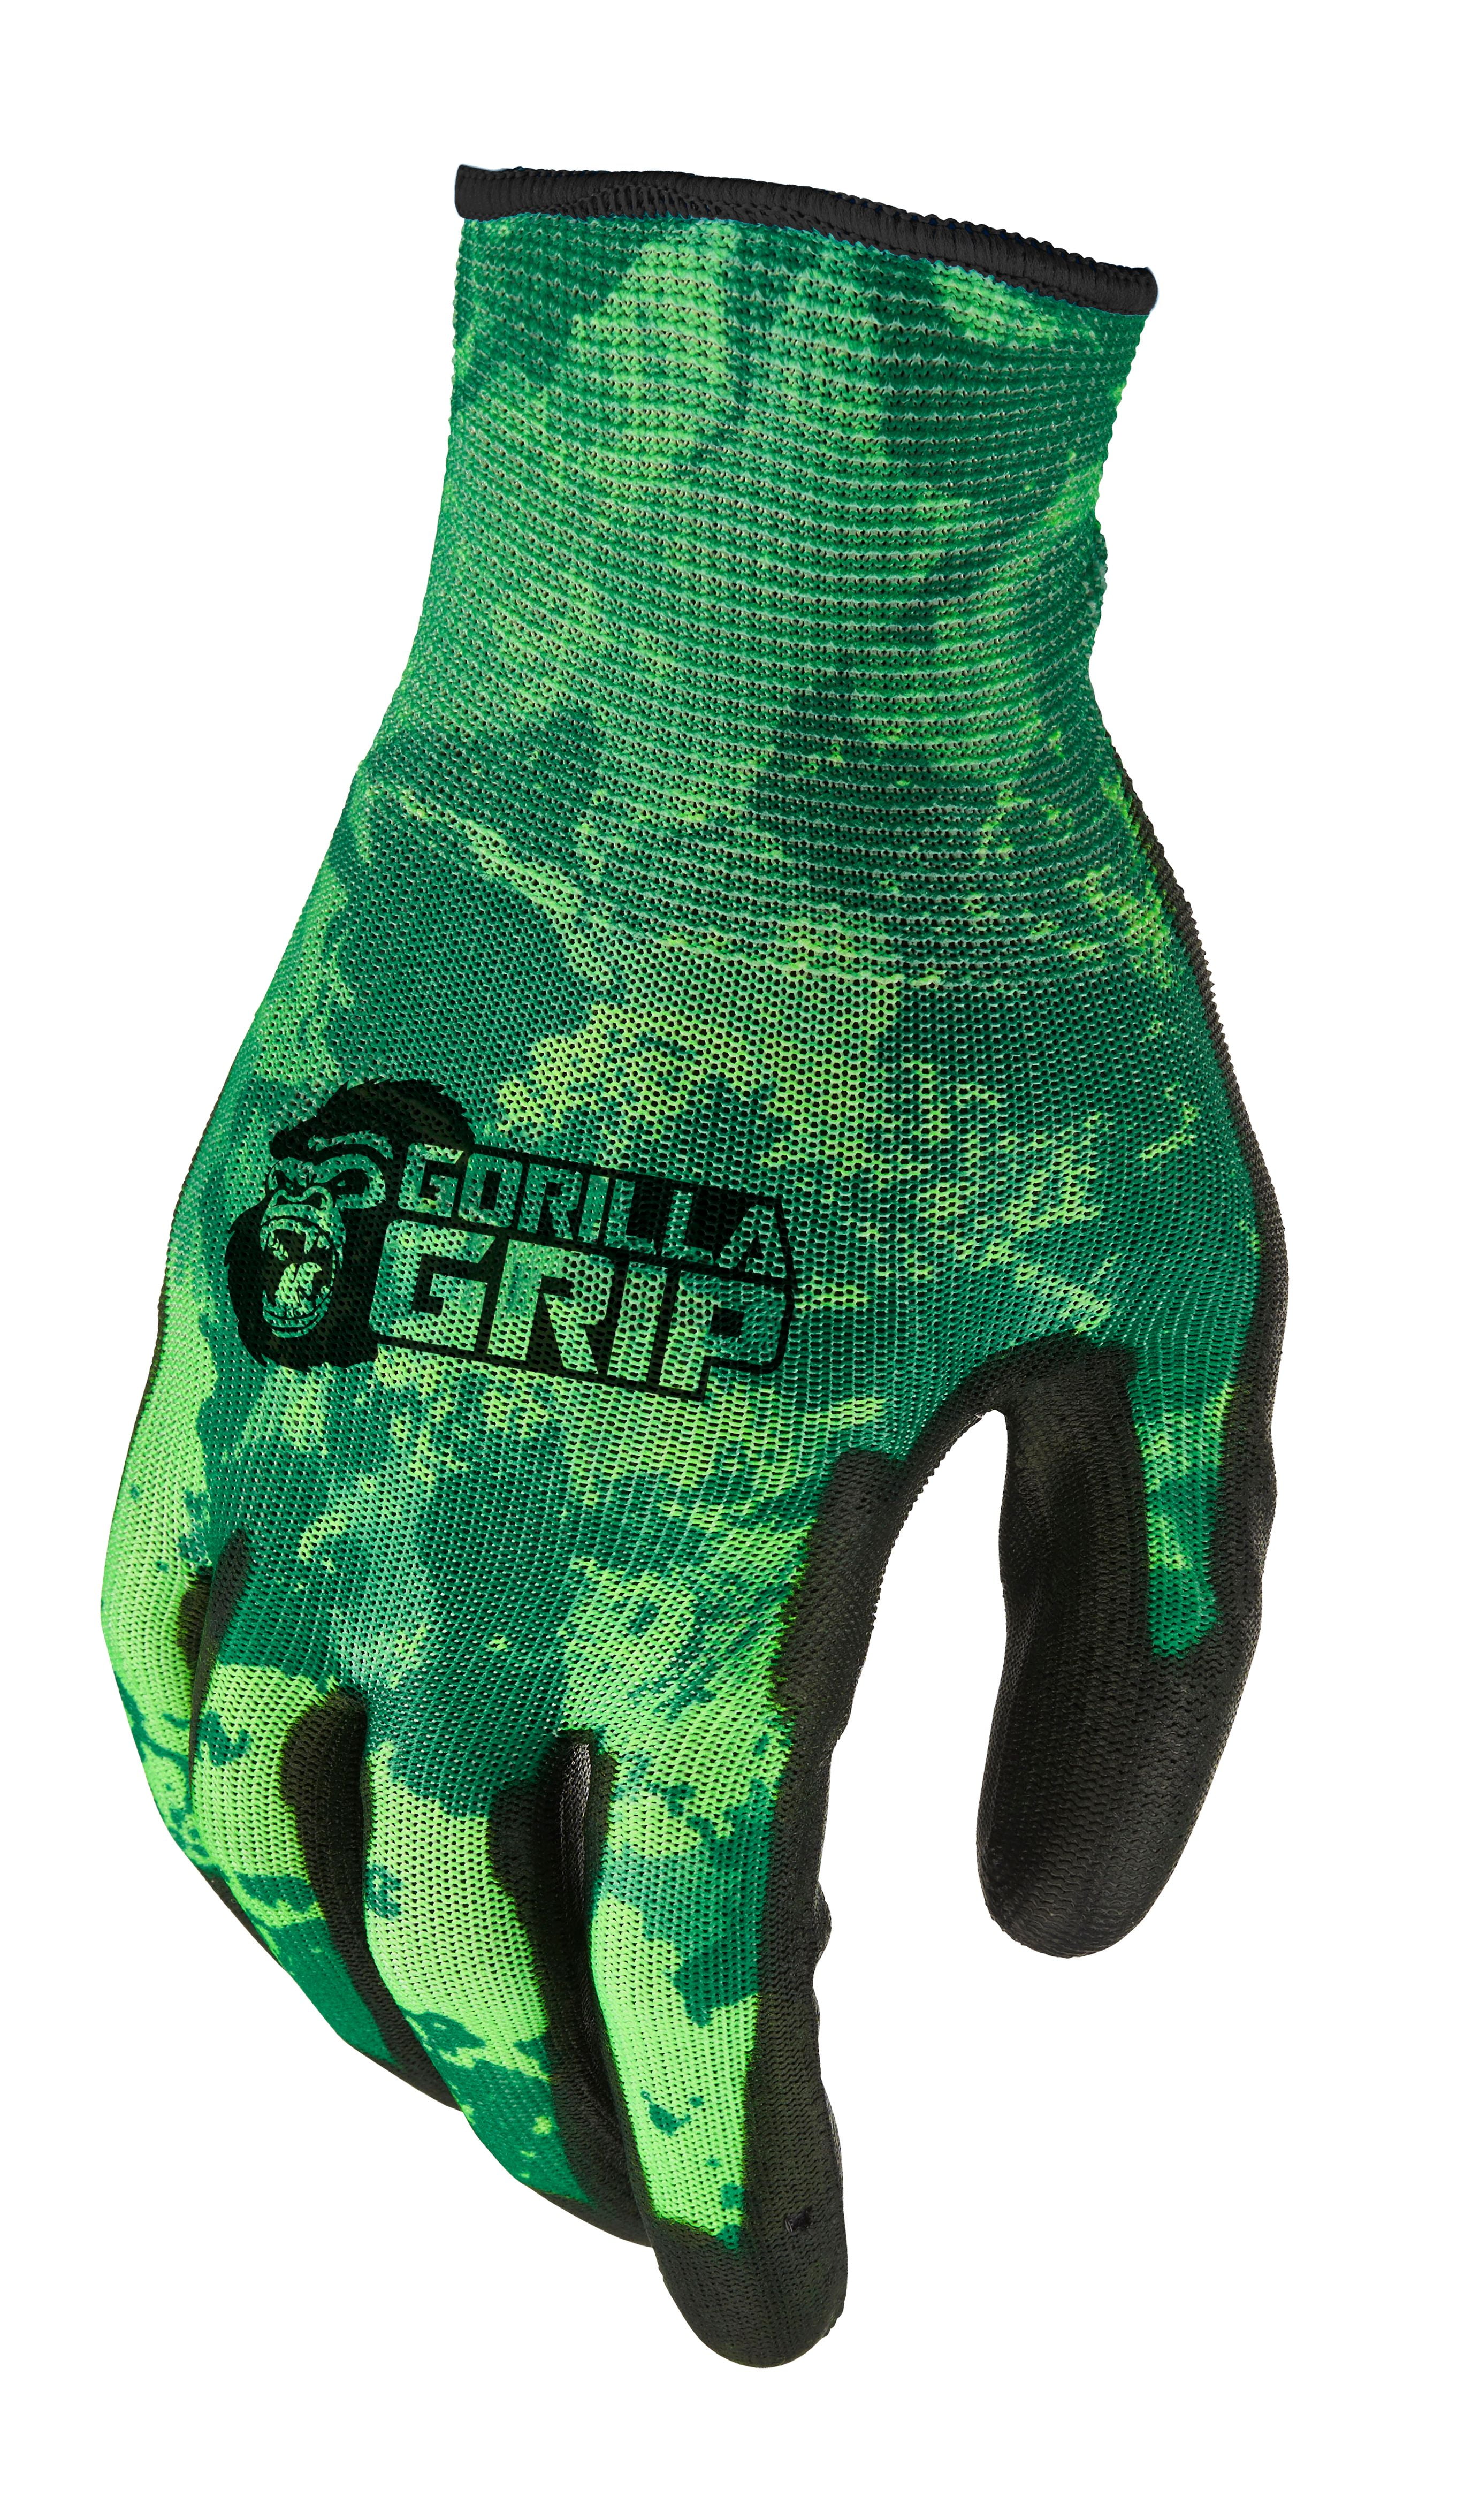 Monkey Grip presents its first MTB glove collection